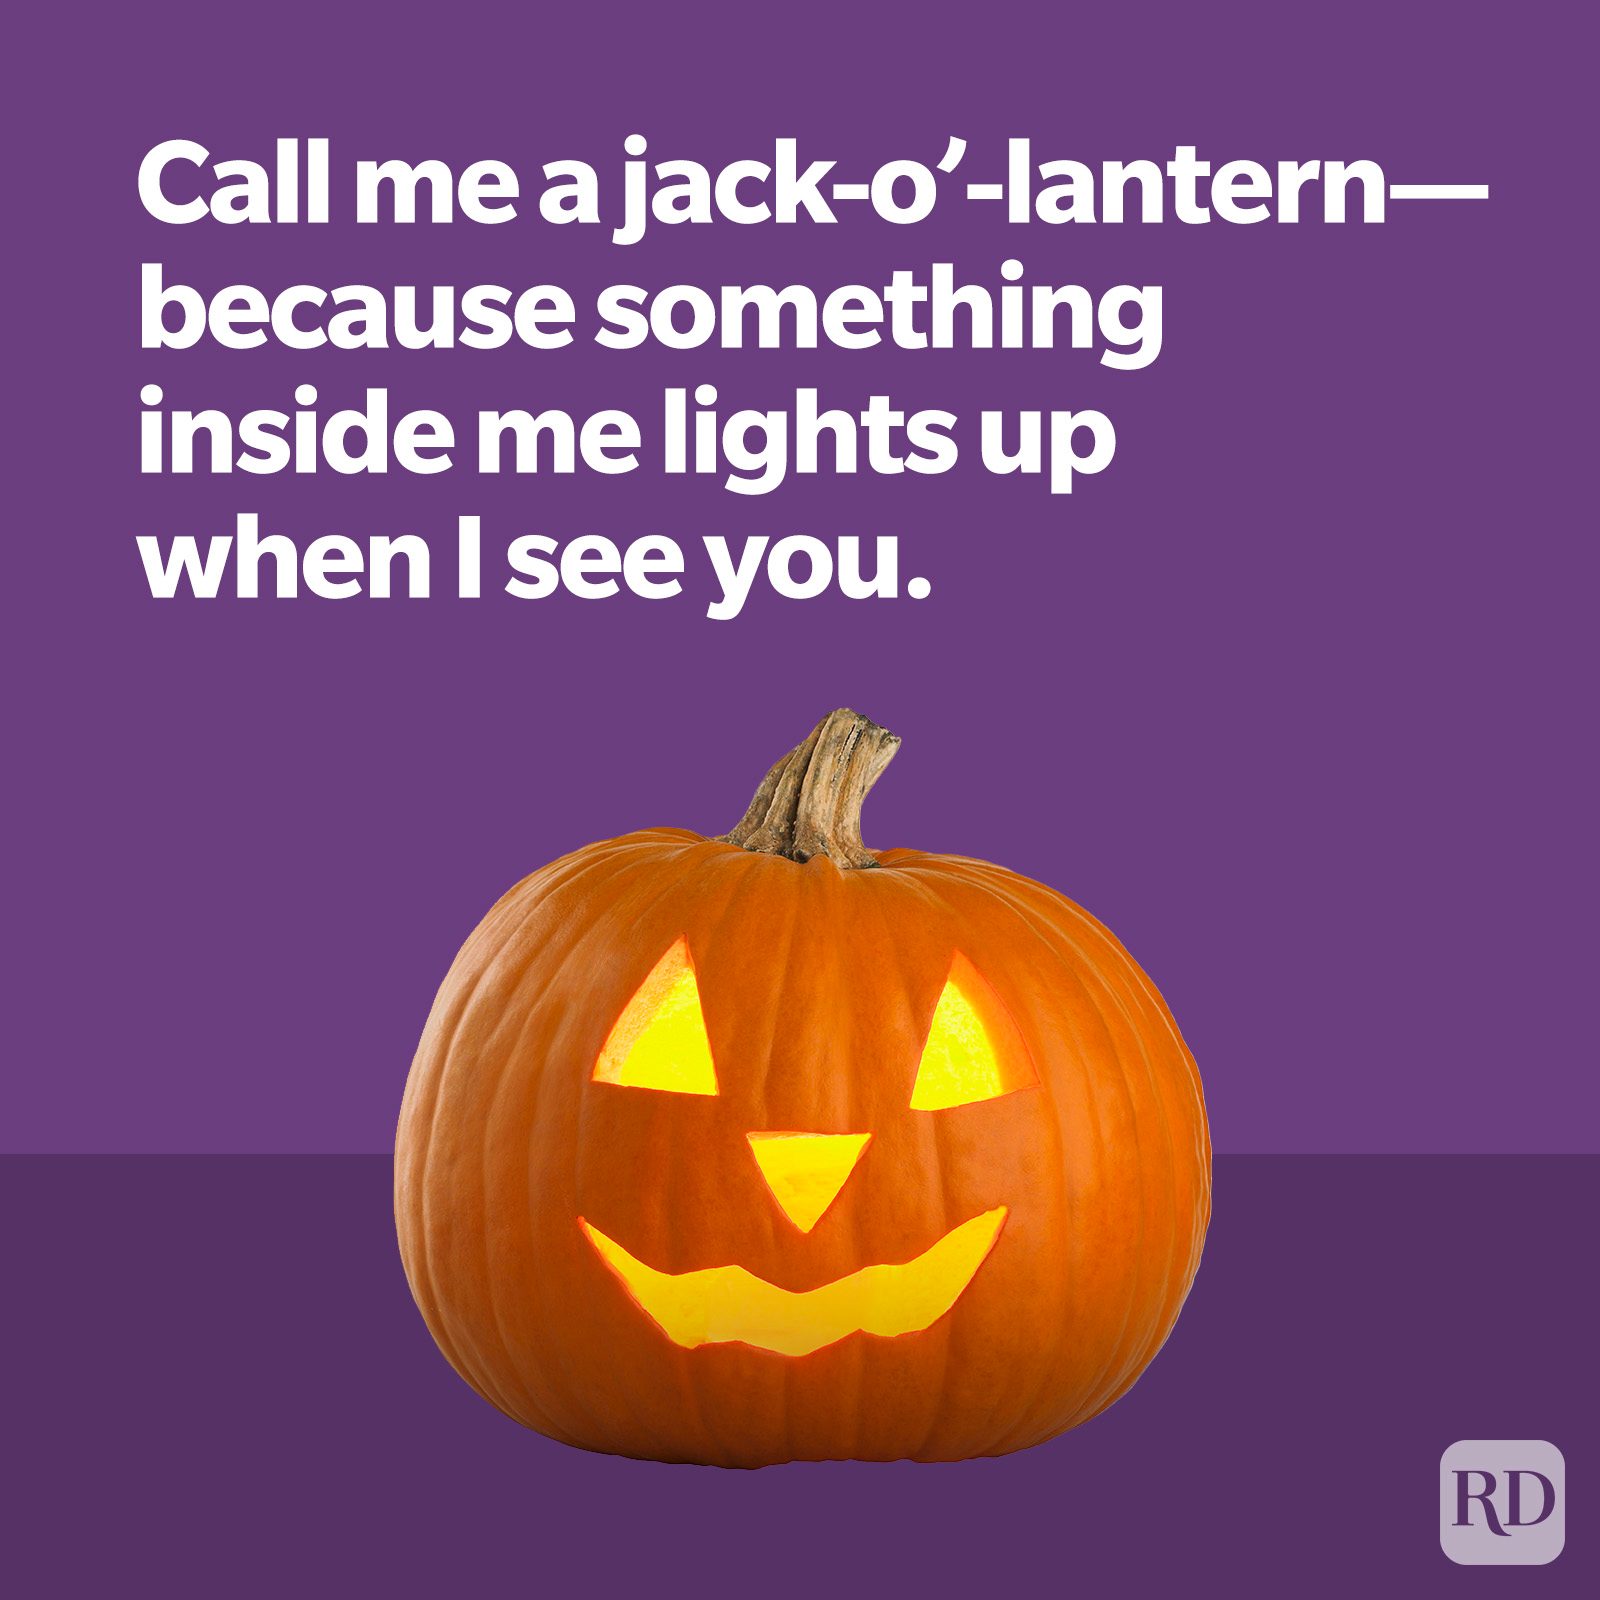 Call me a jack-o'-lantern because something inside me lights up when I see you.